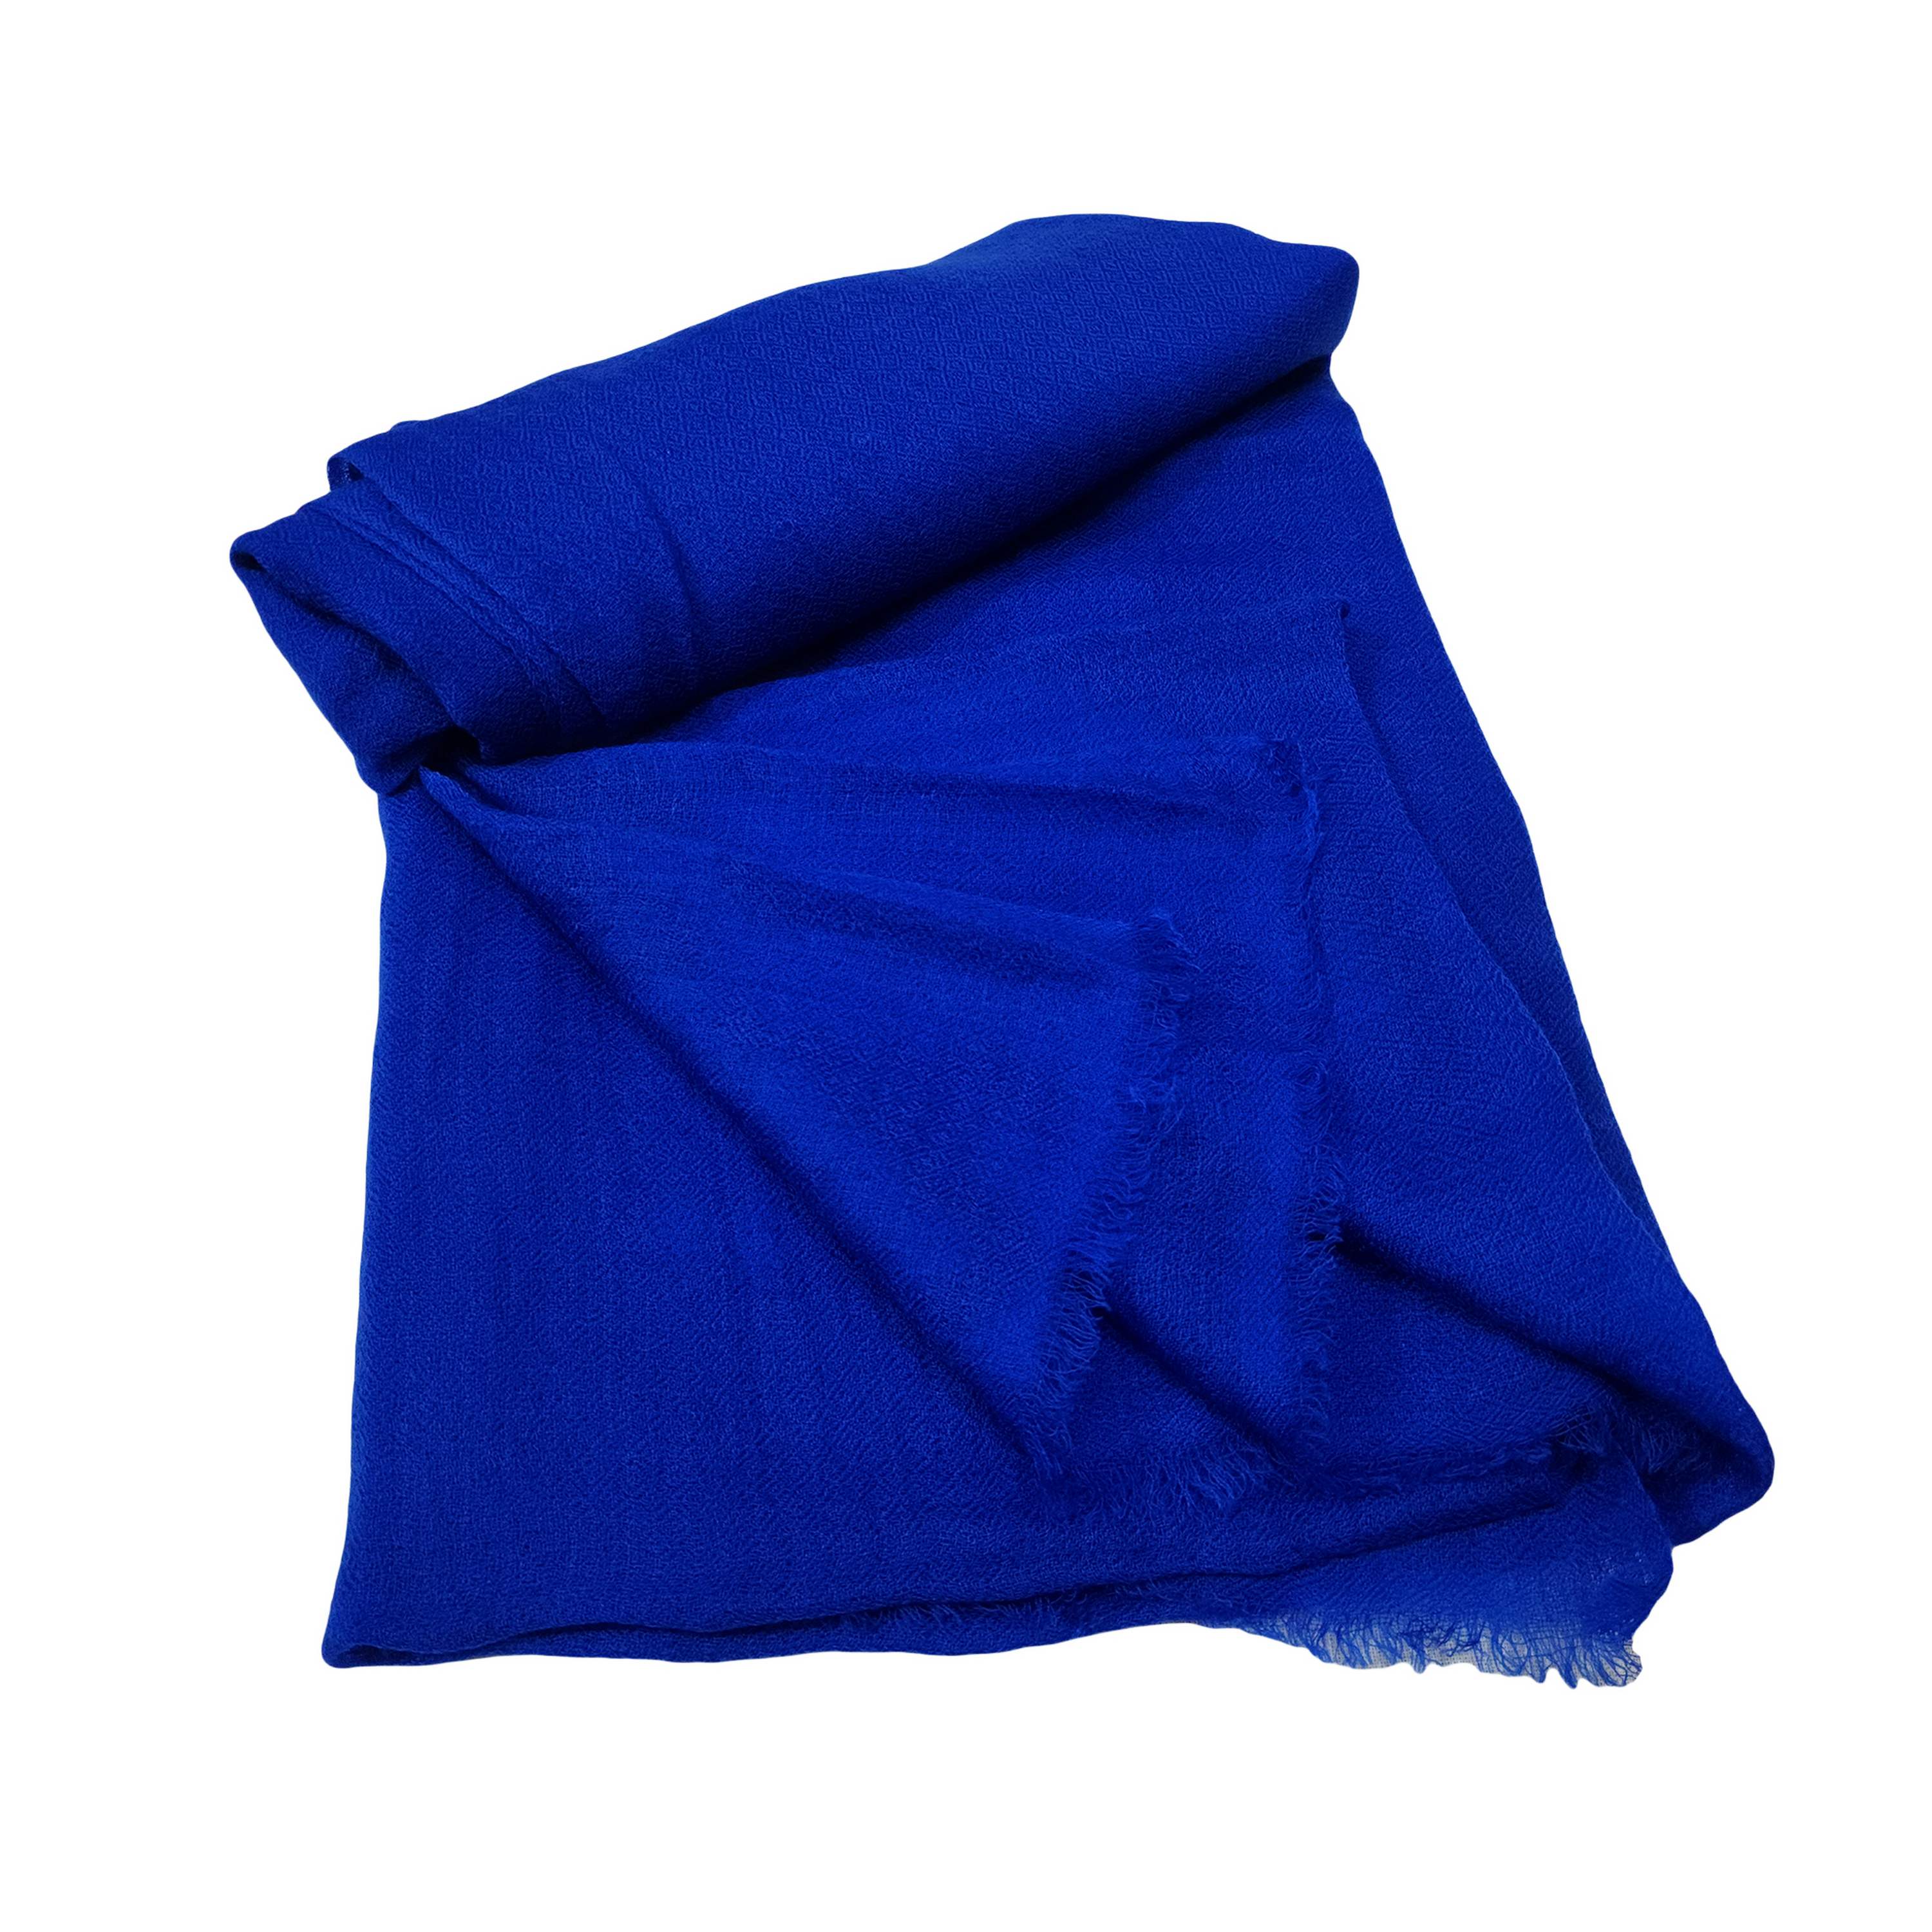 Ring Shawl, A Thin, Soft, And Light Shawl For All-weather Use, Two-ply Wool, Color blue